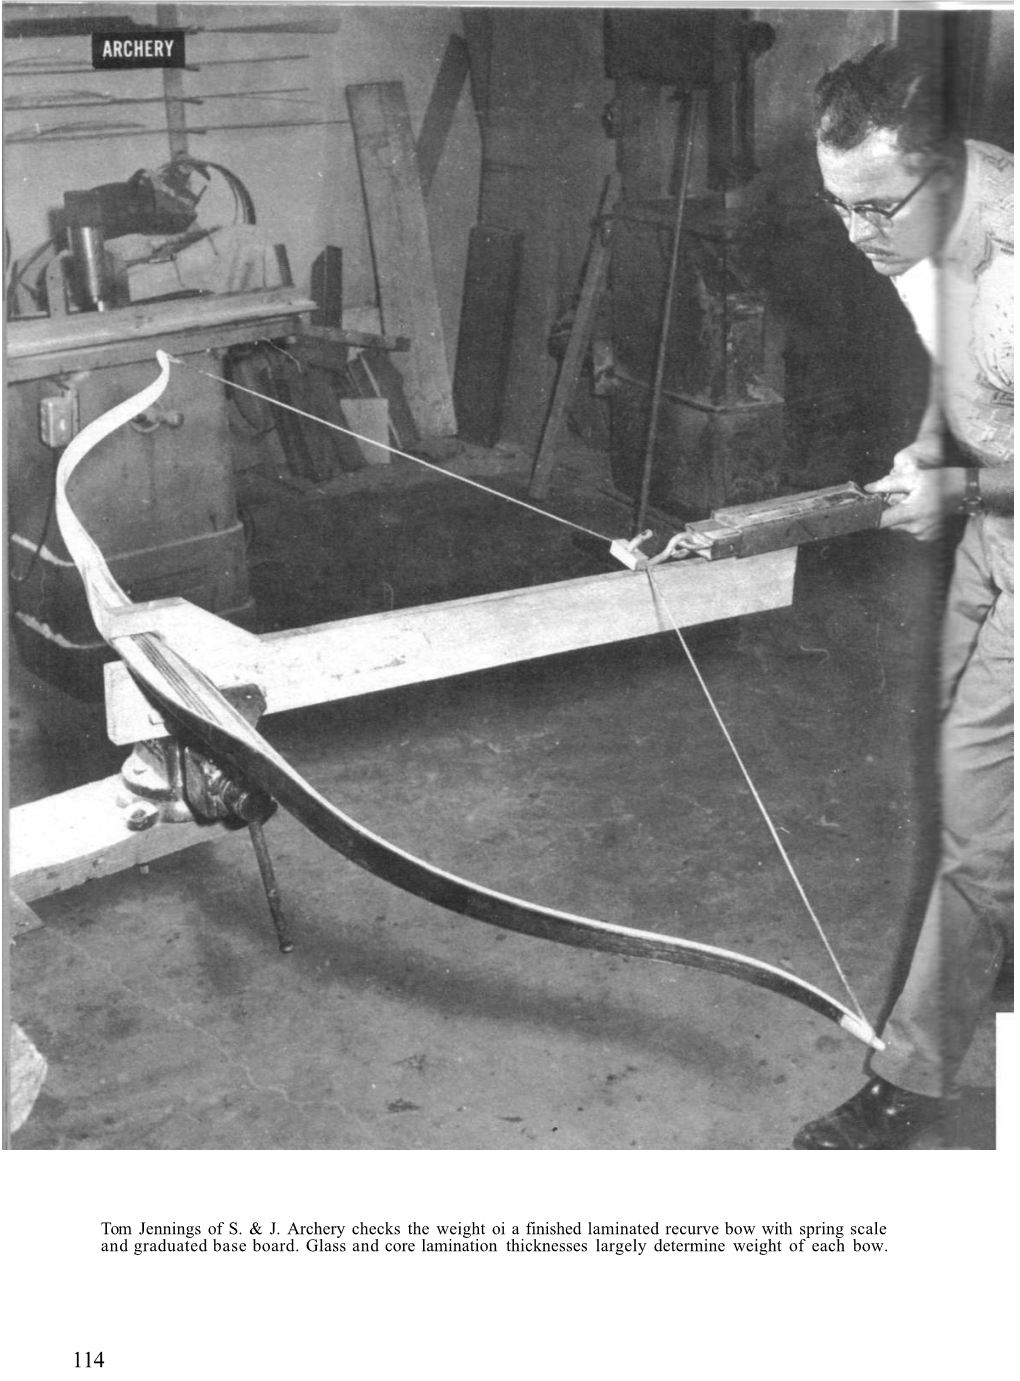 Tom Jennings of S. & J. Archery Checks the Weight Oi a Finished Laminated Recurve Bow with Spring Scale and Graduated Base B